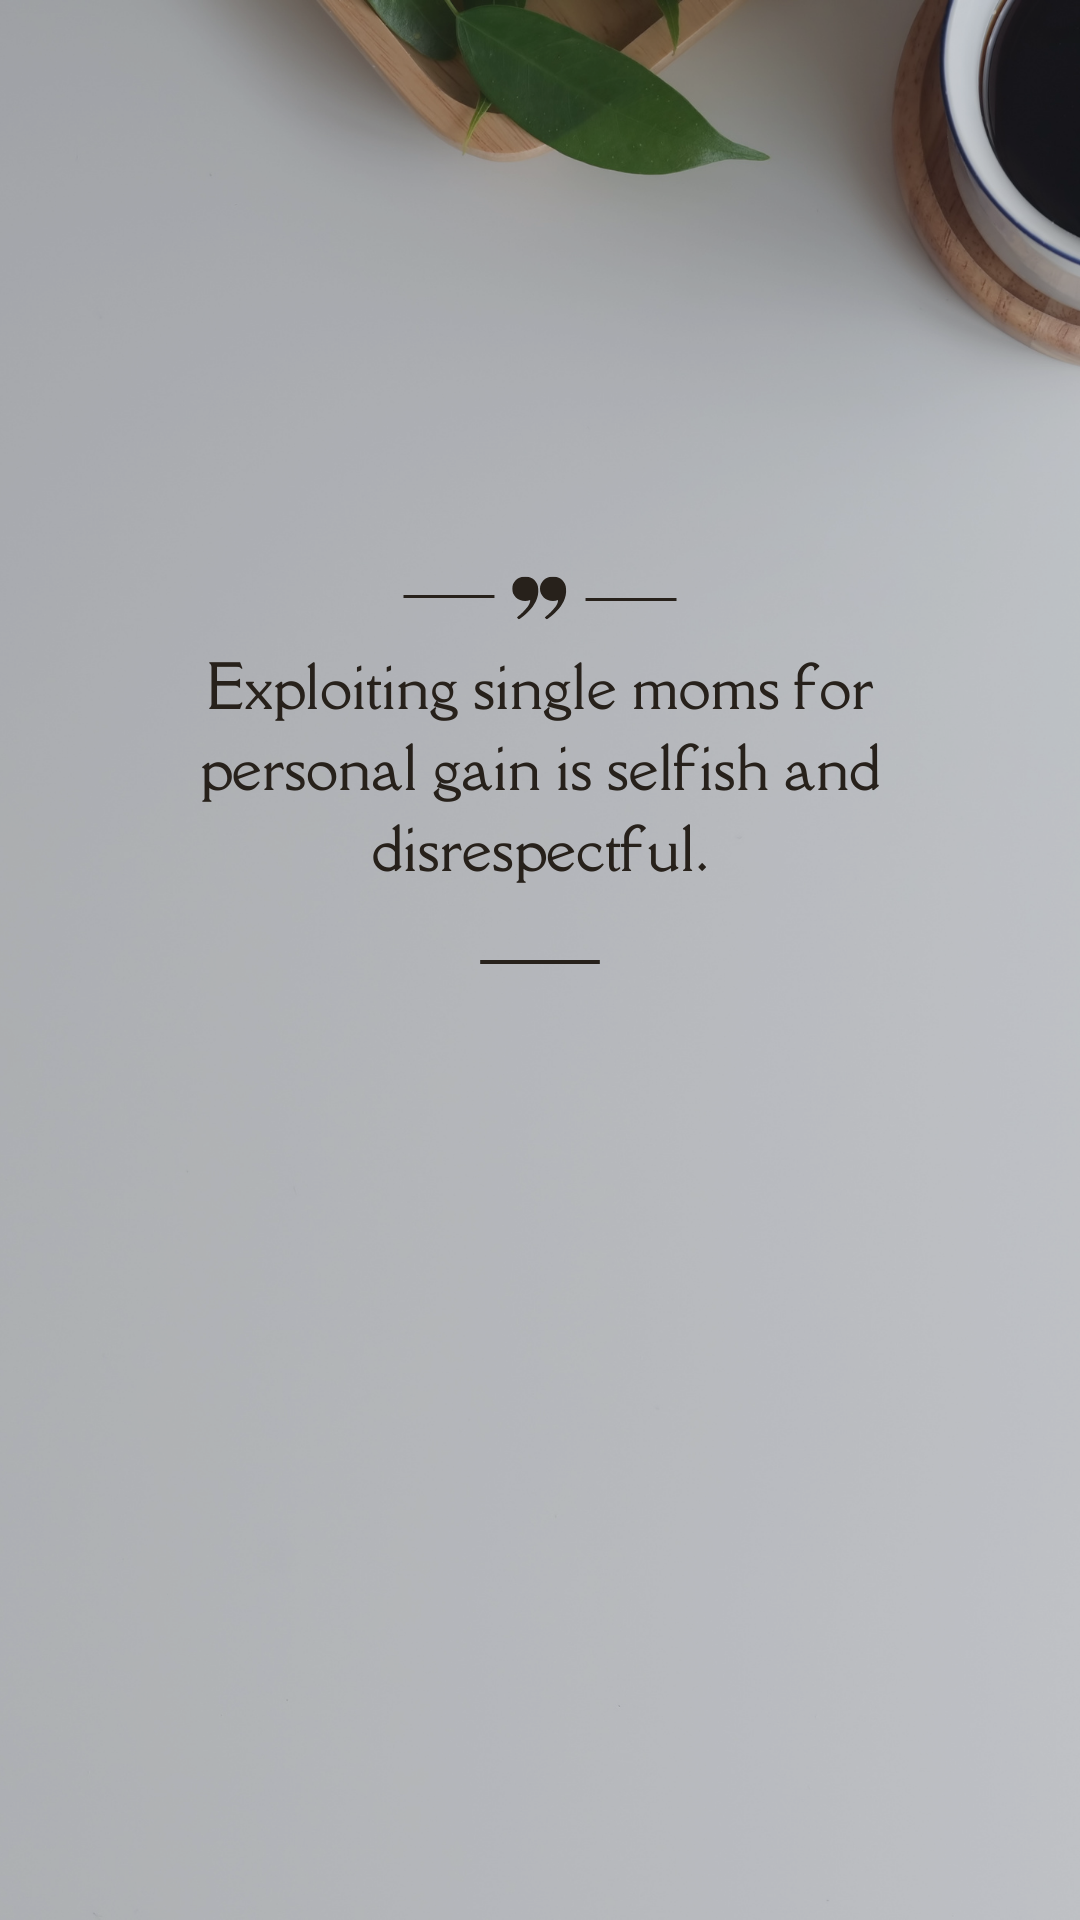 Exploiting single moms for personal gain is selfish and disrespectful. (Quote)